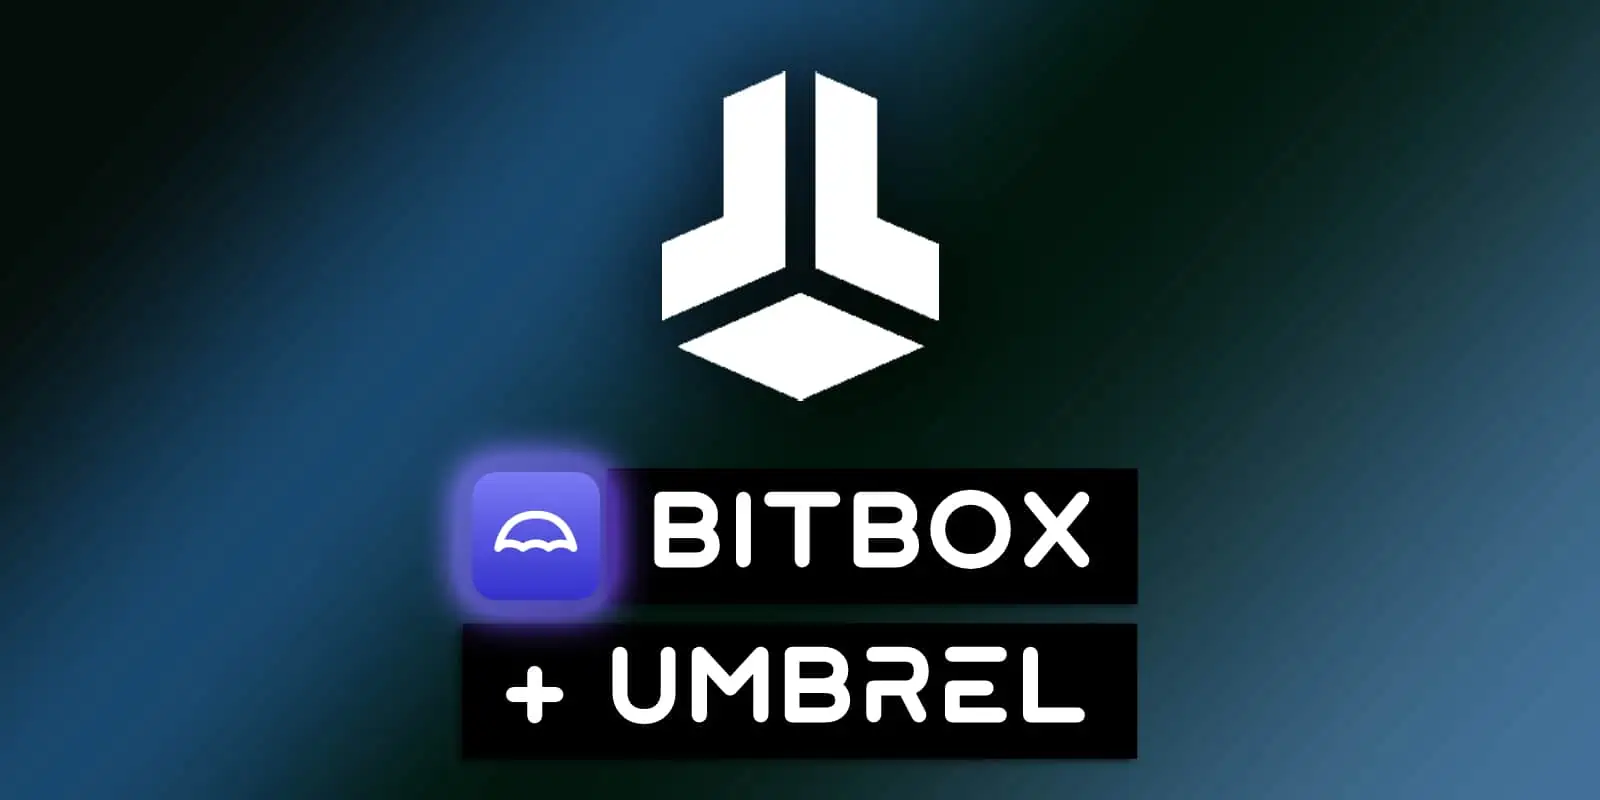 Connect BitBox Wallet To Umbrel